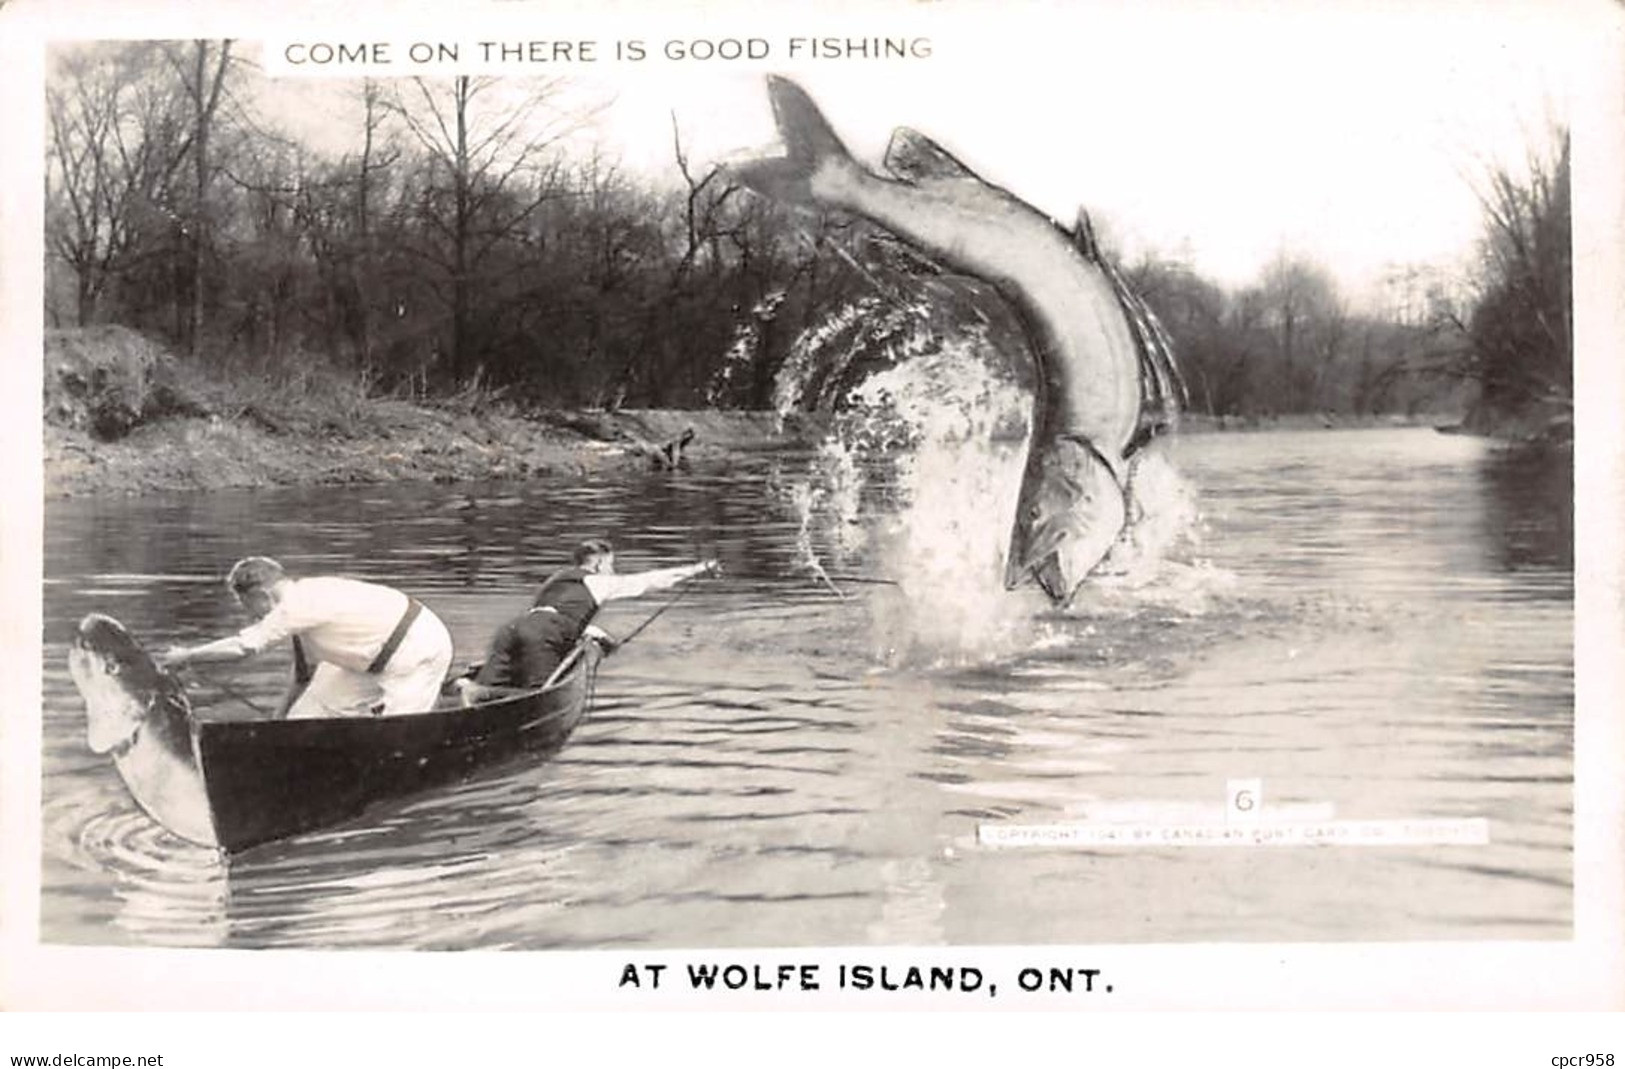 Sports - N°67108 - Pêche - Come On There Is Good Fishing - At Wolfe Island, Ont - Surréalisme Et Montage - Pêche